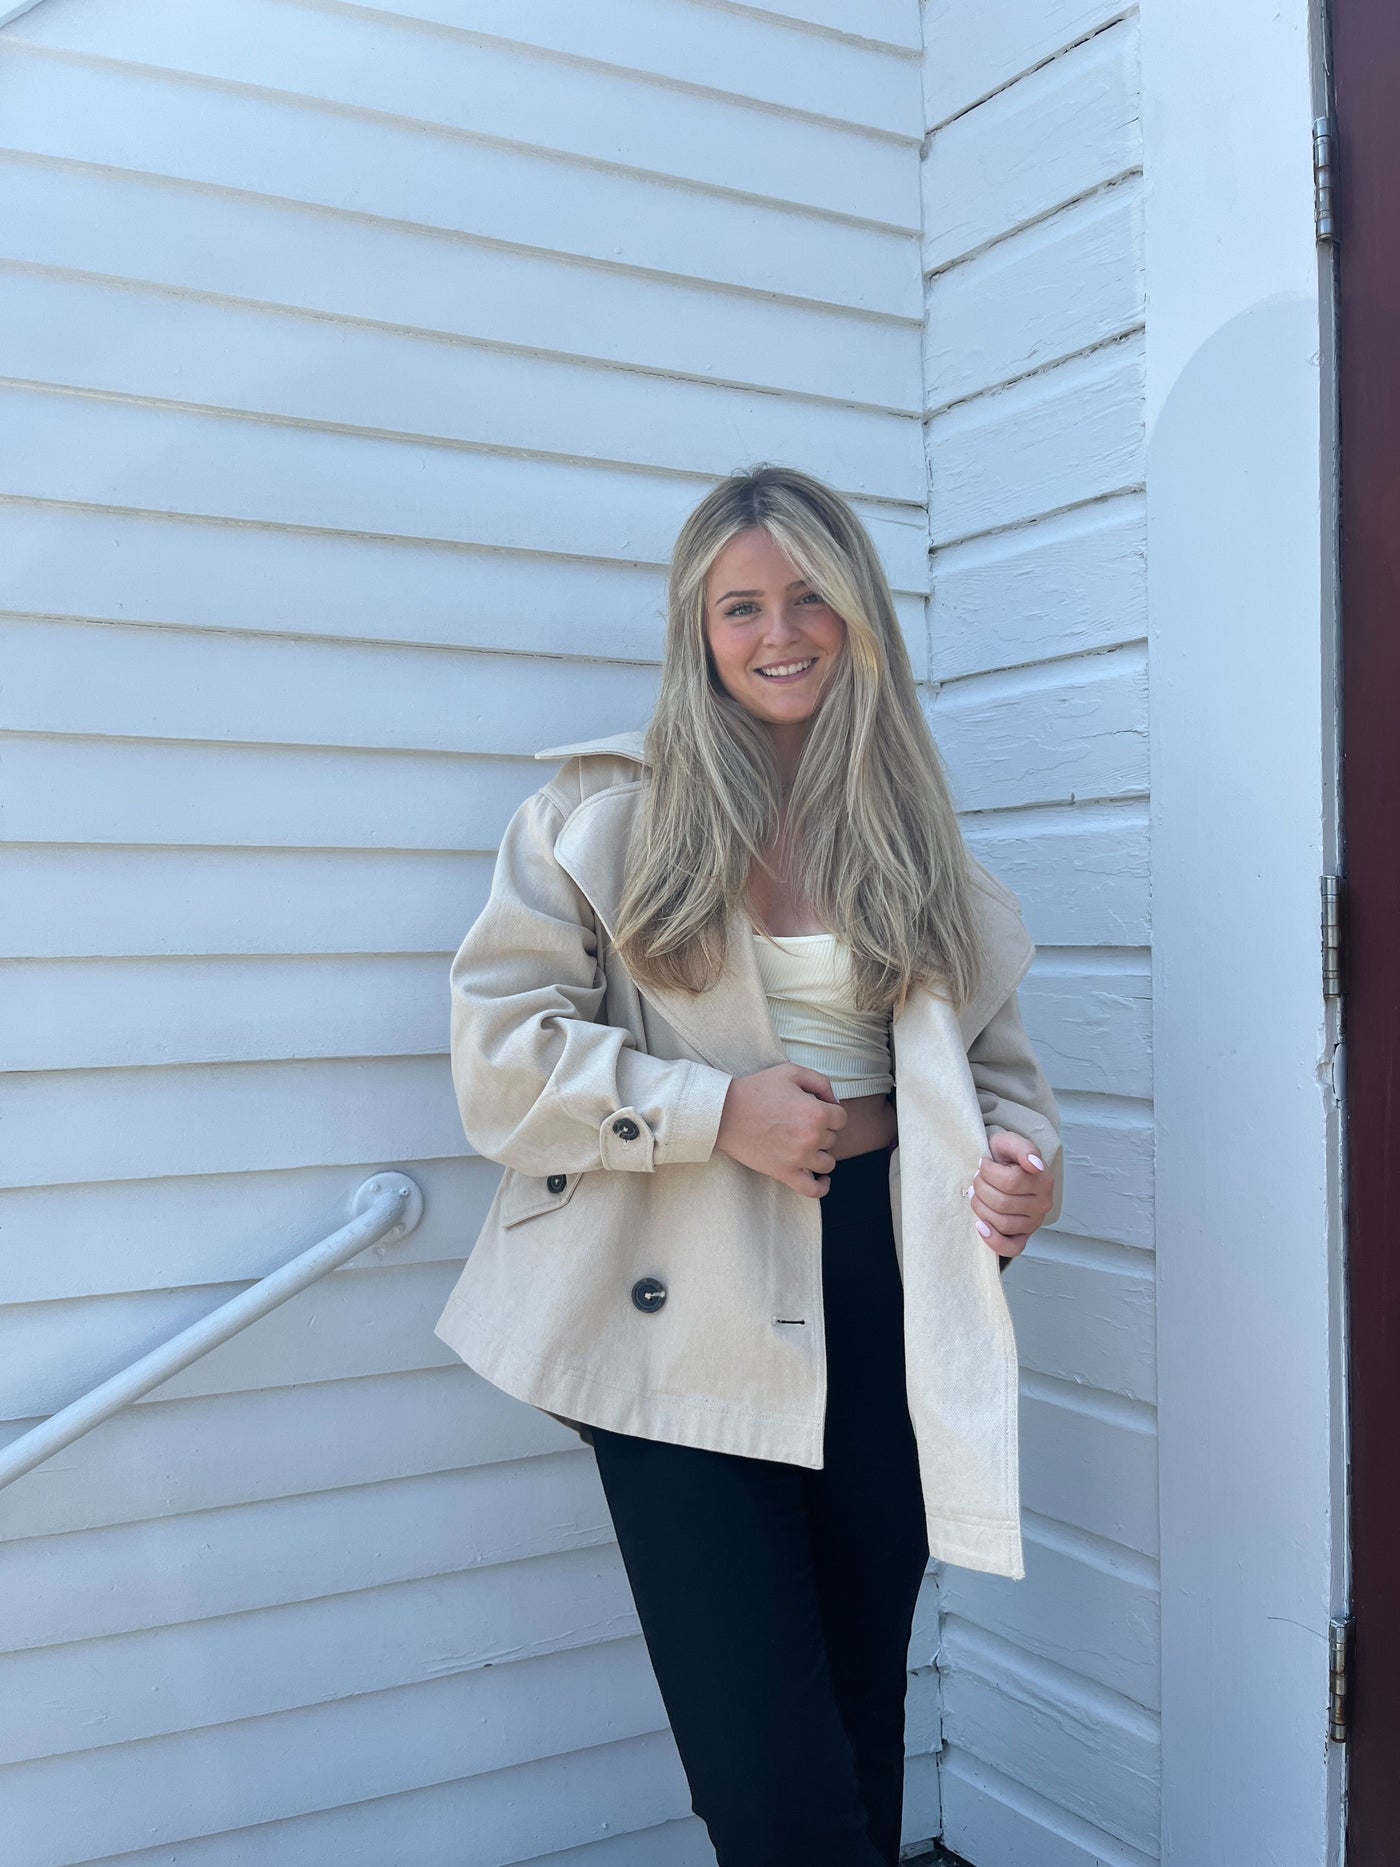 Highlands Solid Peacoat - Madison's Niche 